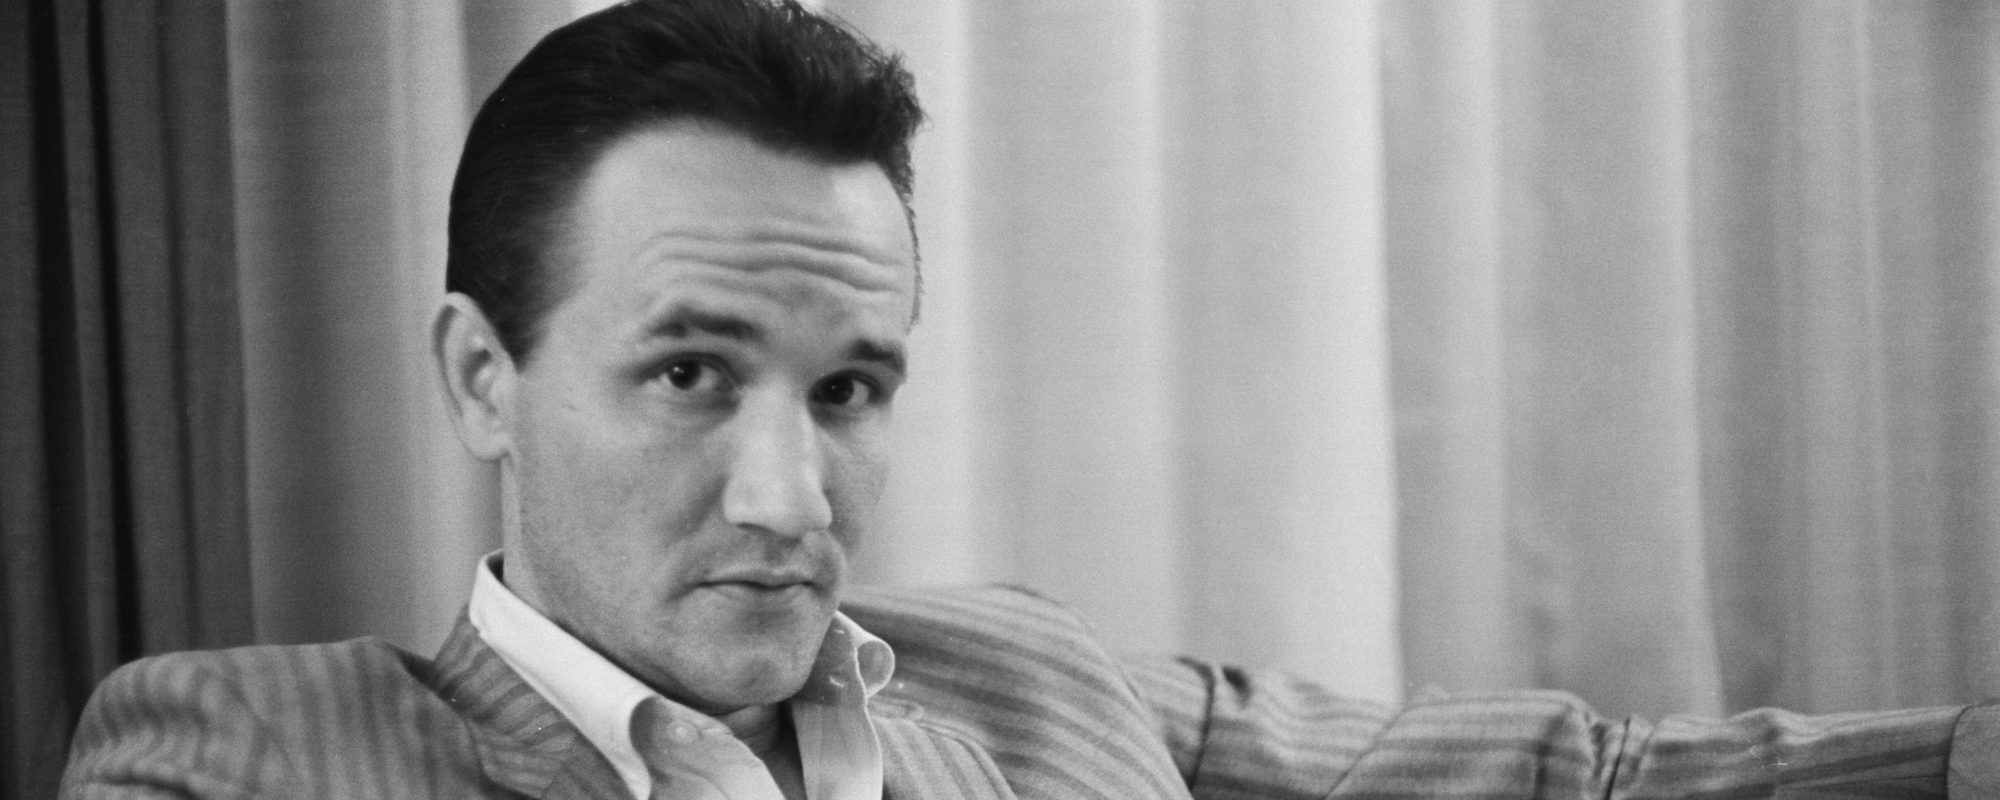 Roger Miller’s Serious Comedy: The Surprisingly Somber Meaning Behind “Dang Me”